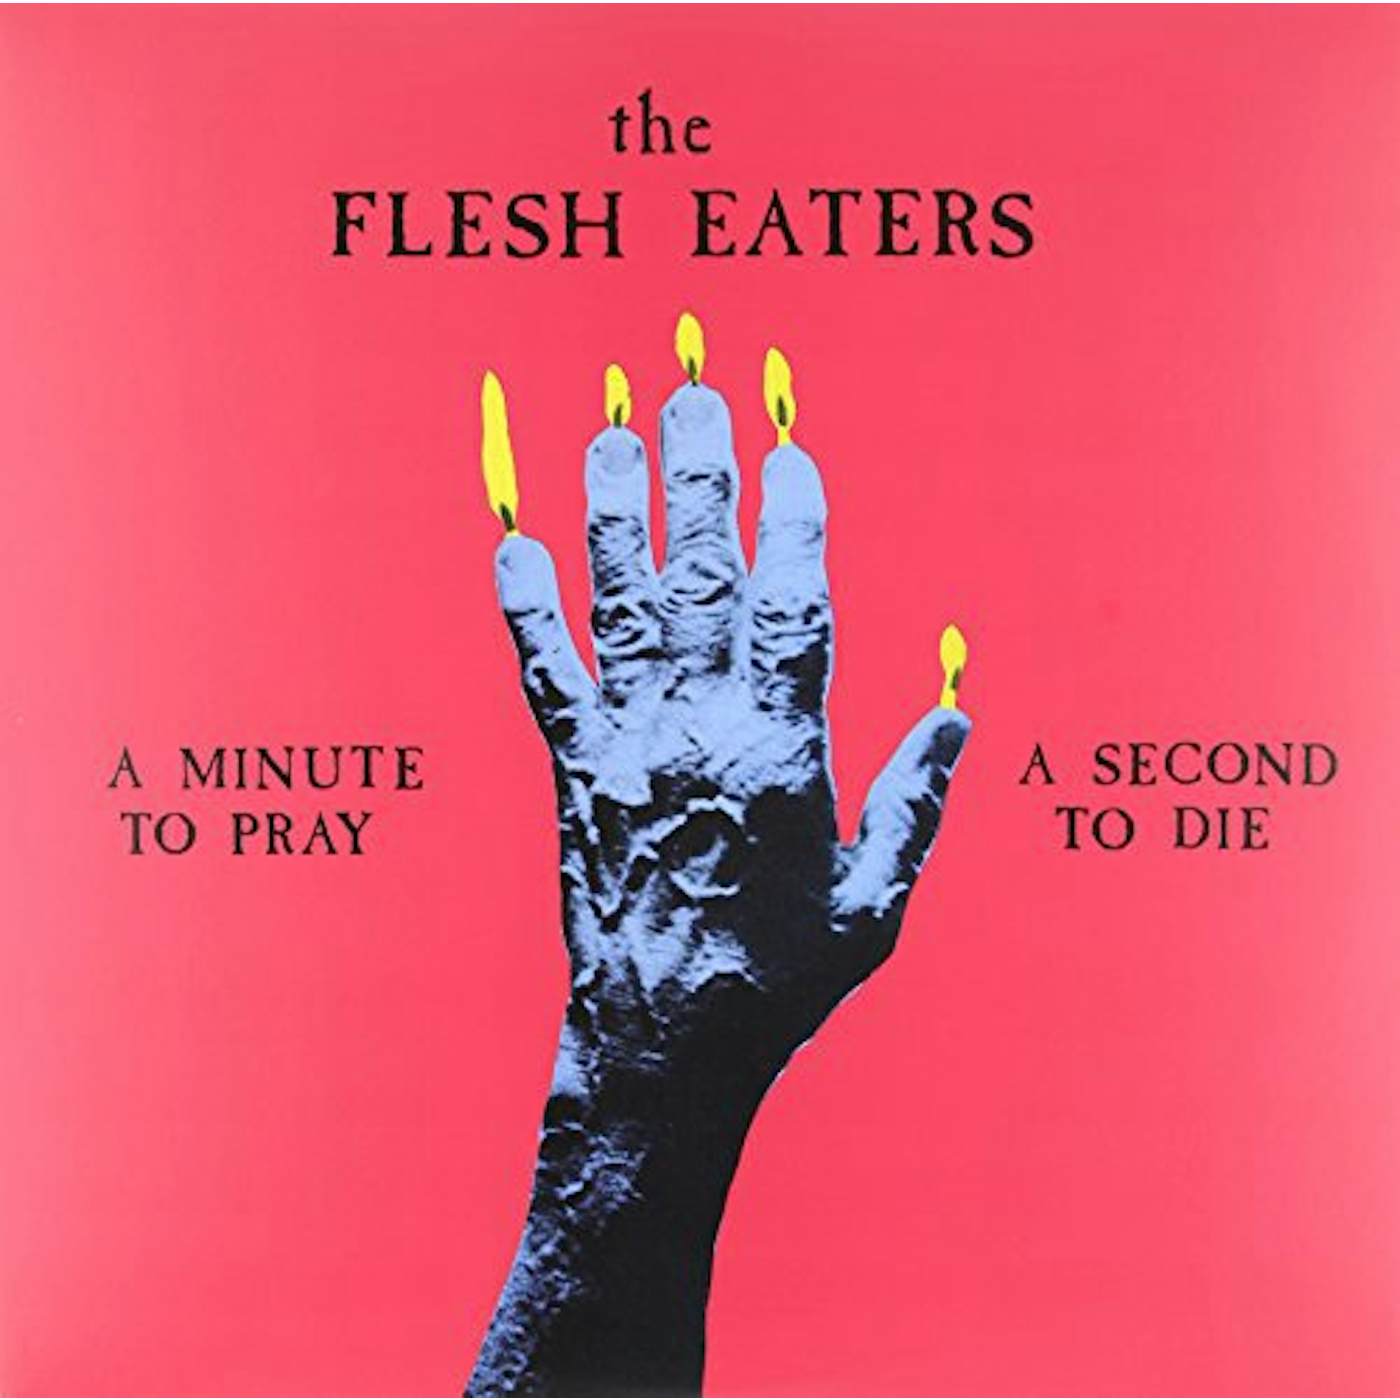 The Flesh Eaters MINUTE TO PRAY A SECOND TO DIE Vinyl Record